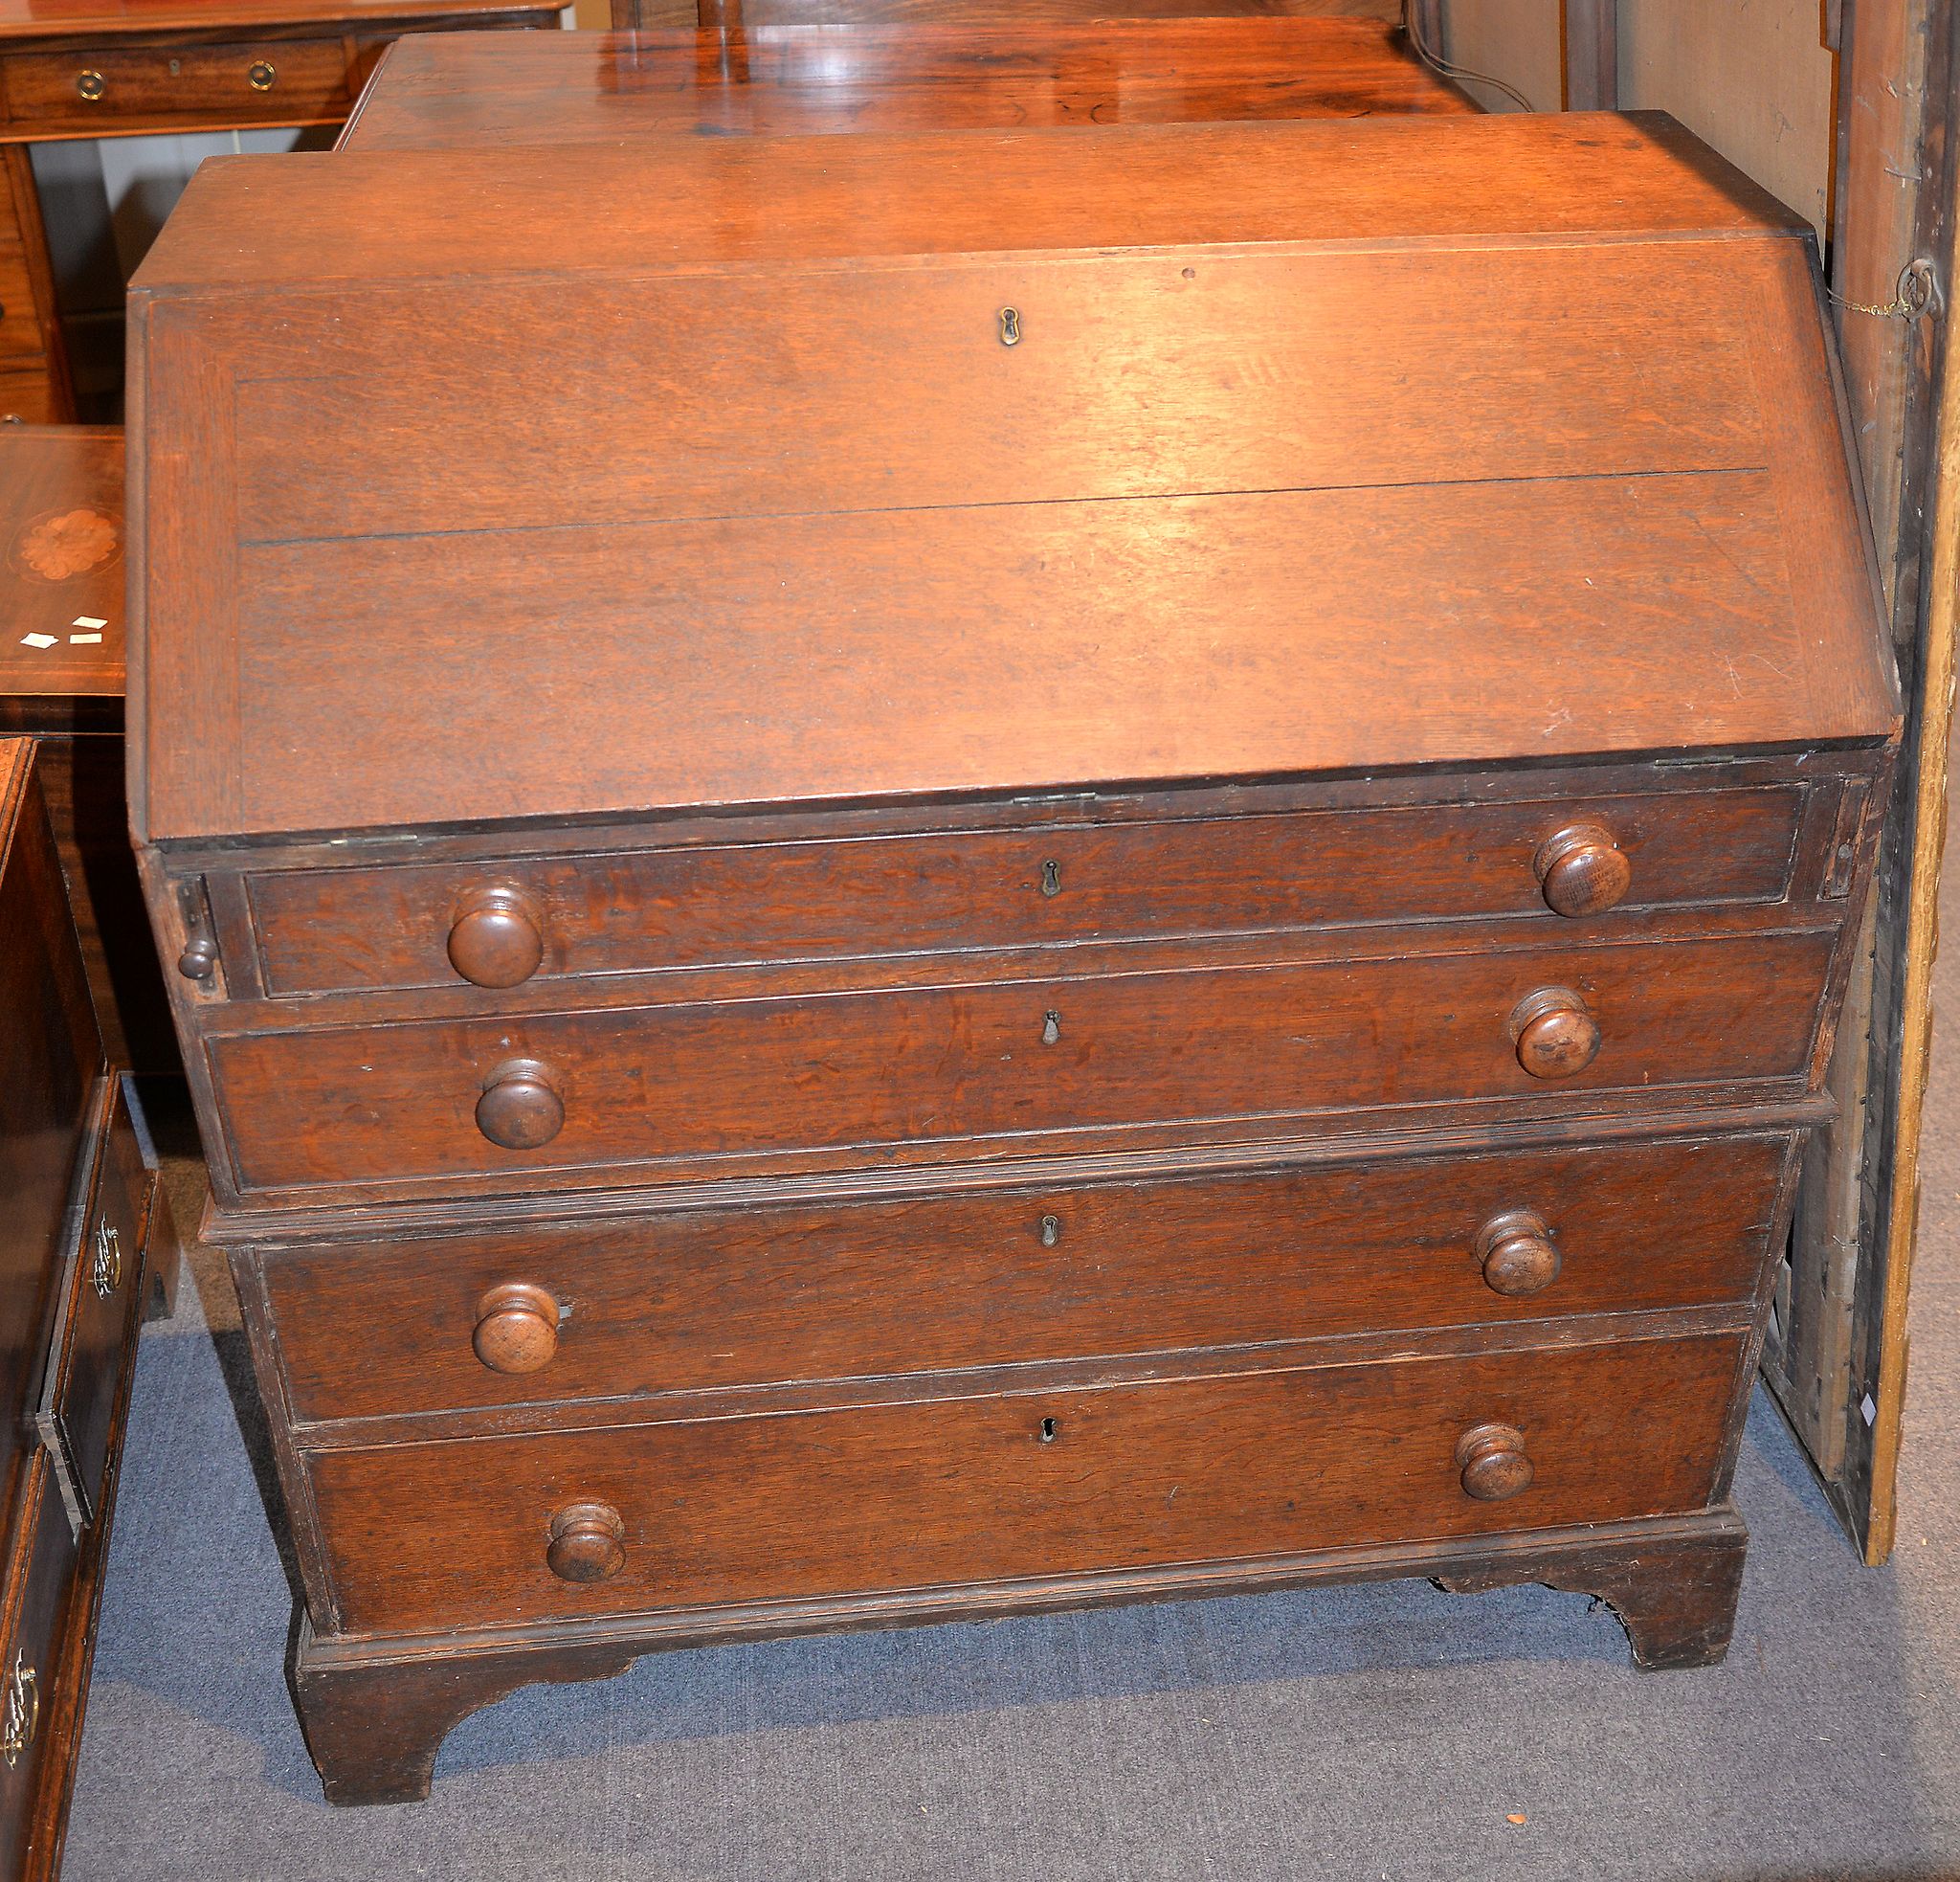 A 19th century oak bureau, with fittings enclosed by a fall, above four long drawers